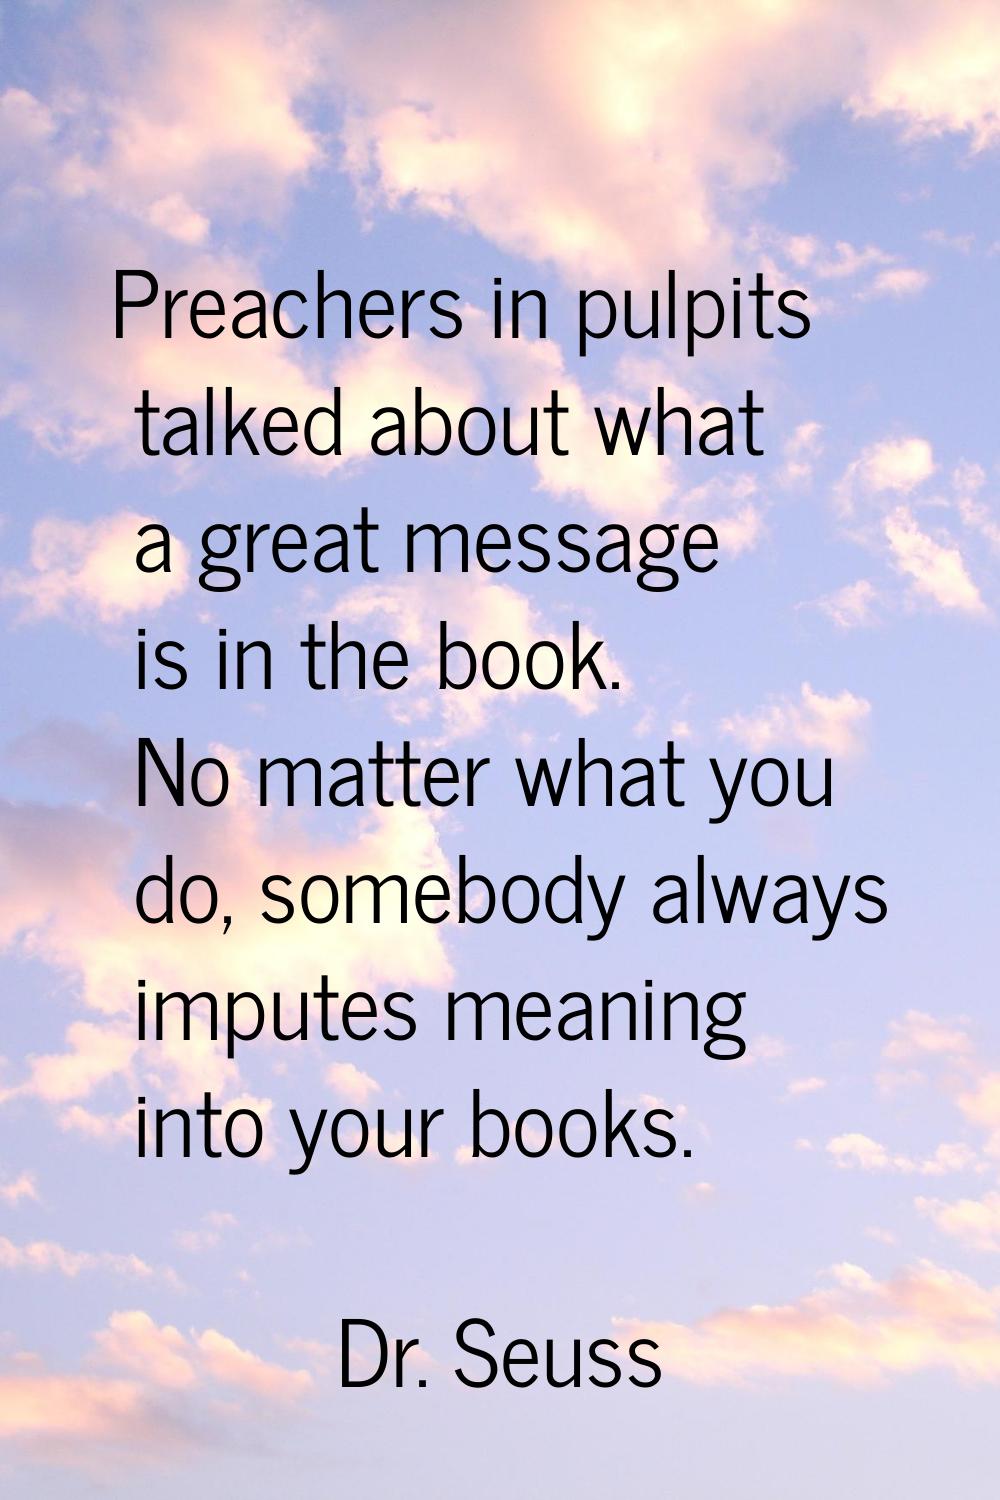 Preachers in pulpits talked about what a great message is in the book. No matter what you do, someb